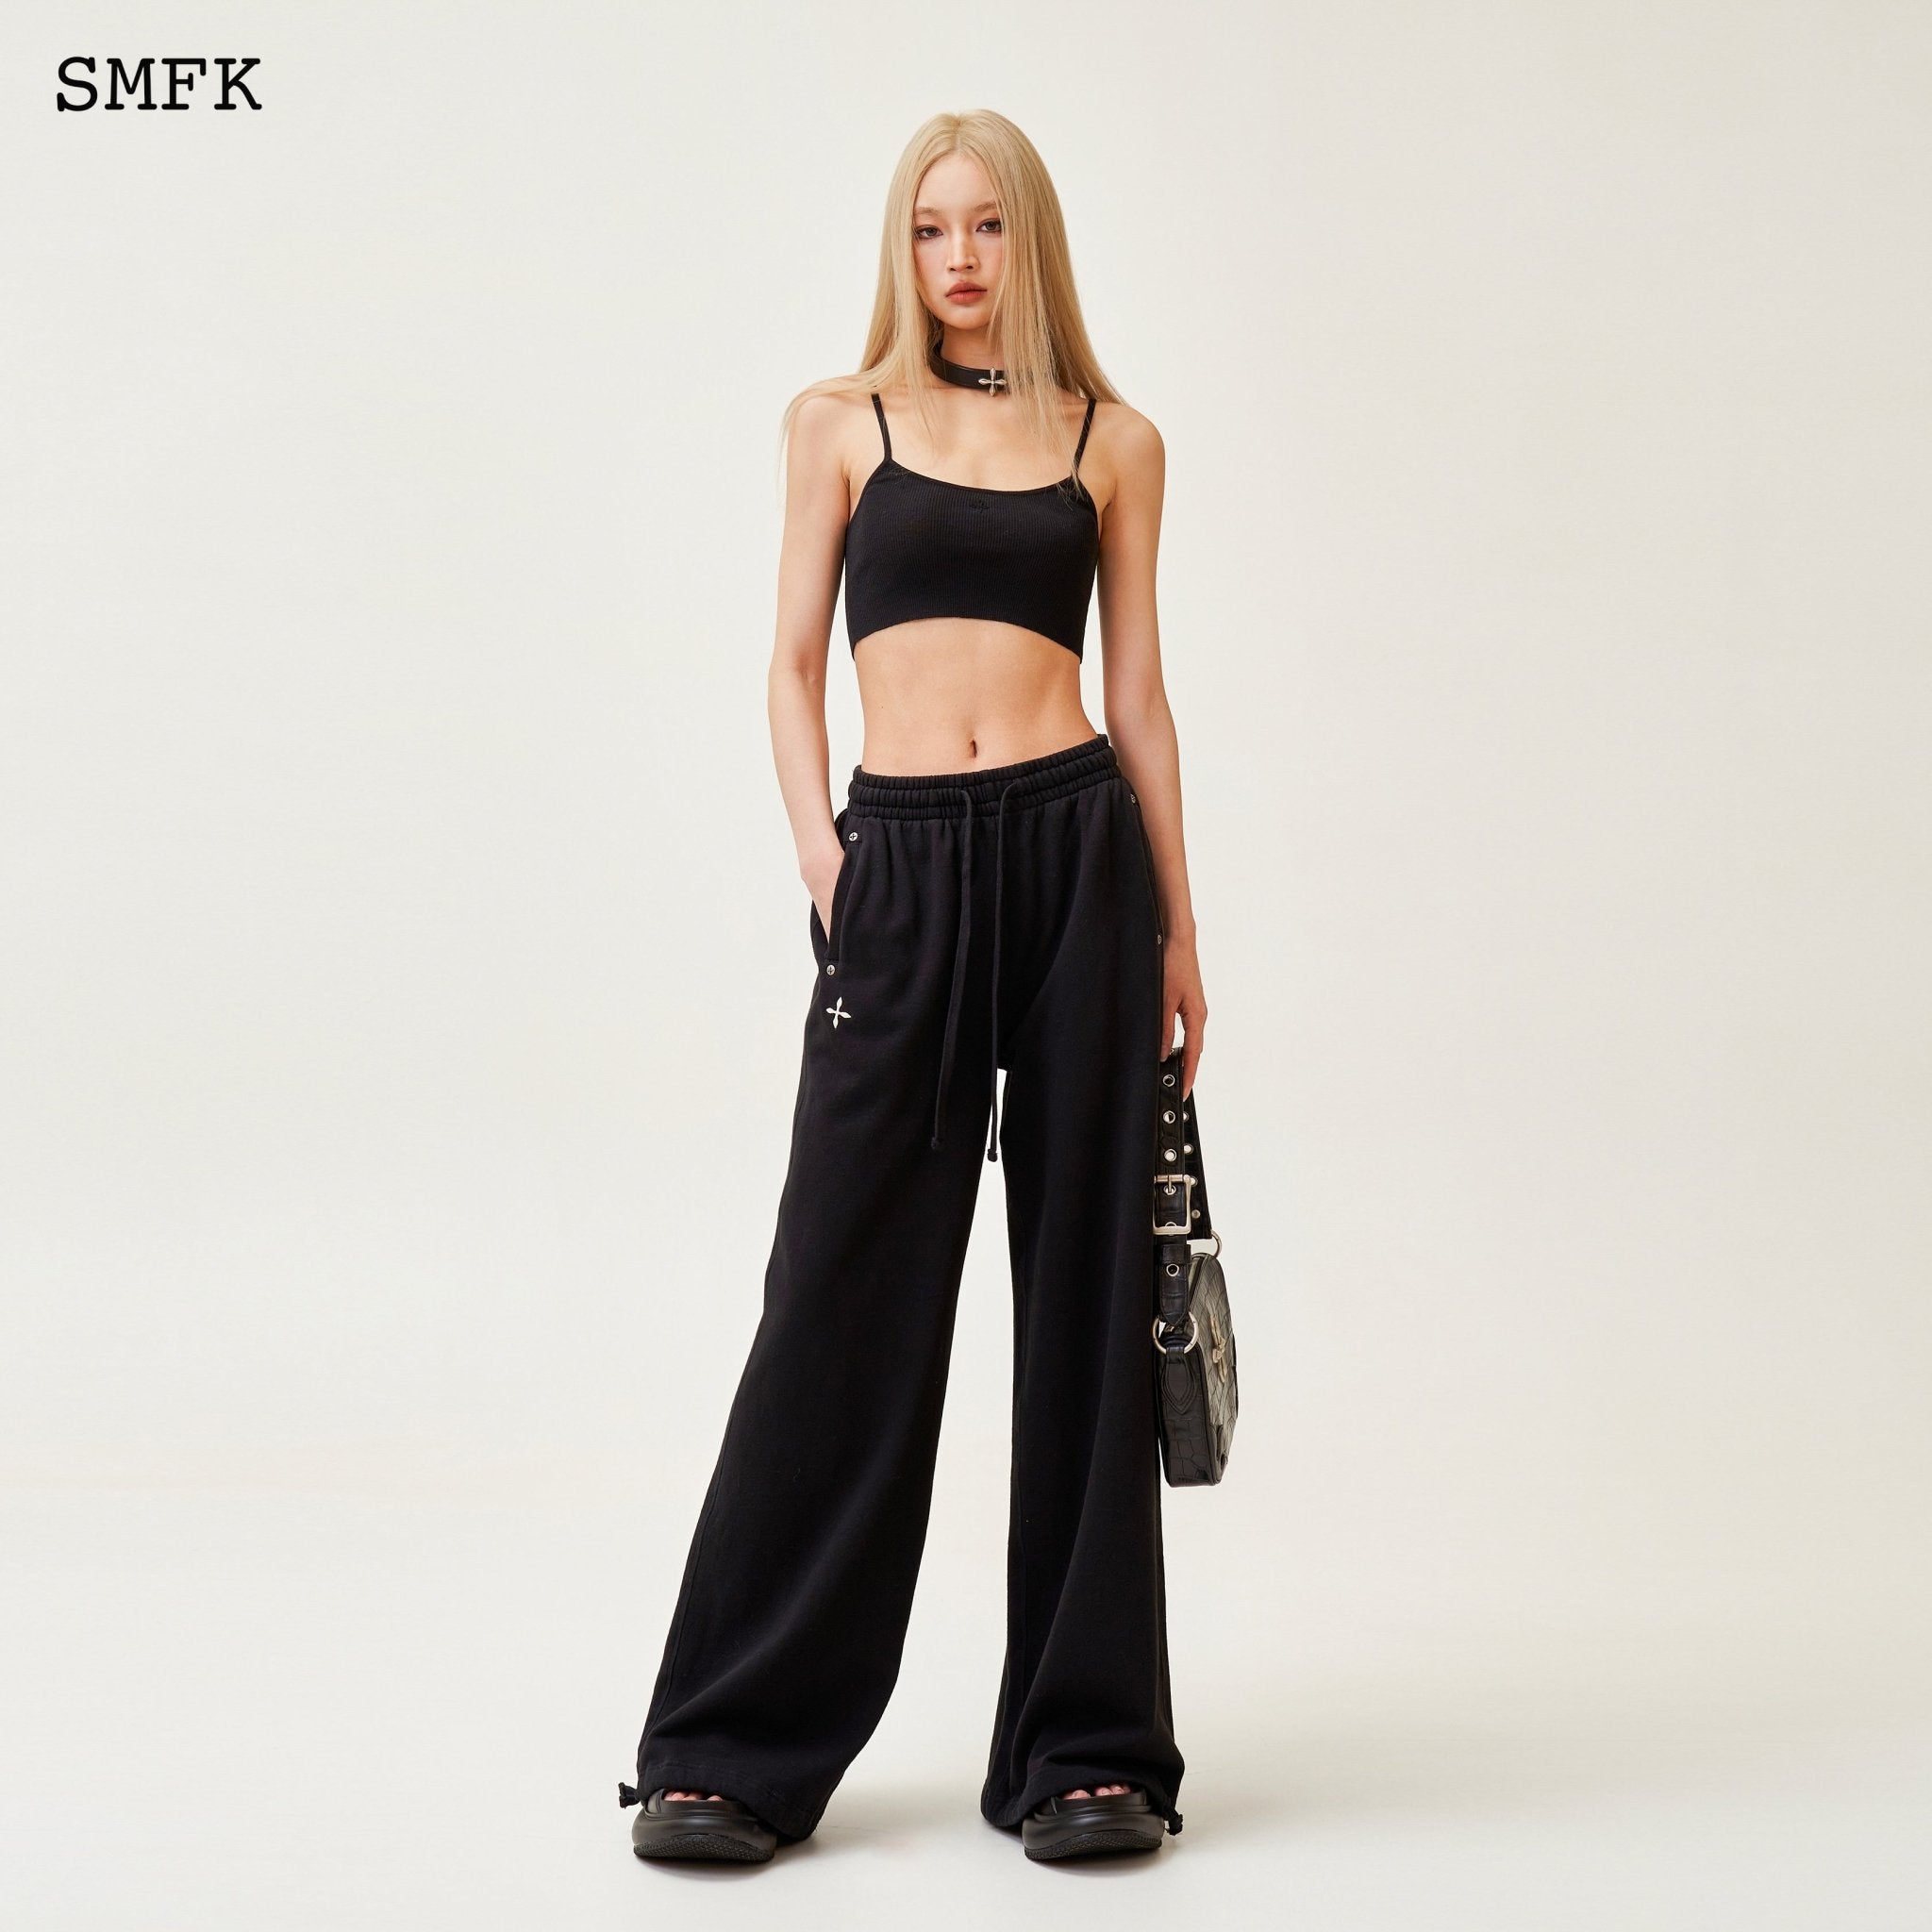 SMFK Compass Cross Classic Knitted Ultra Short Vest Top Black | MADA IN CHINA